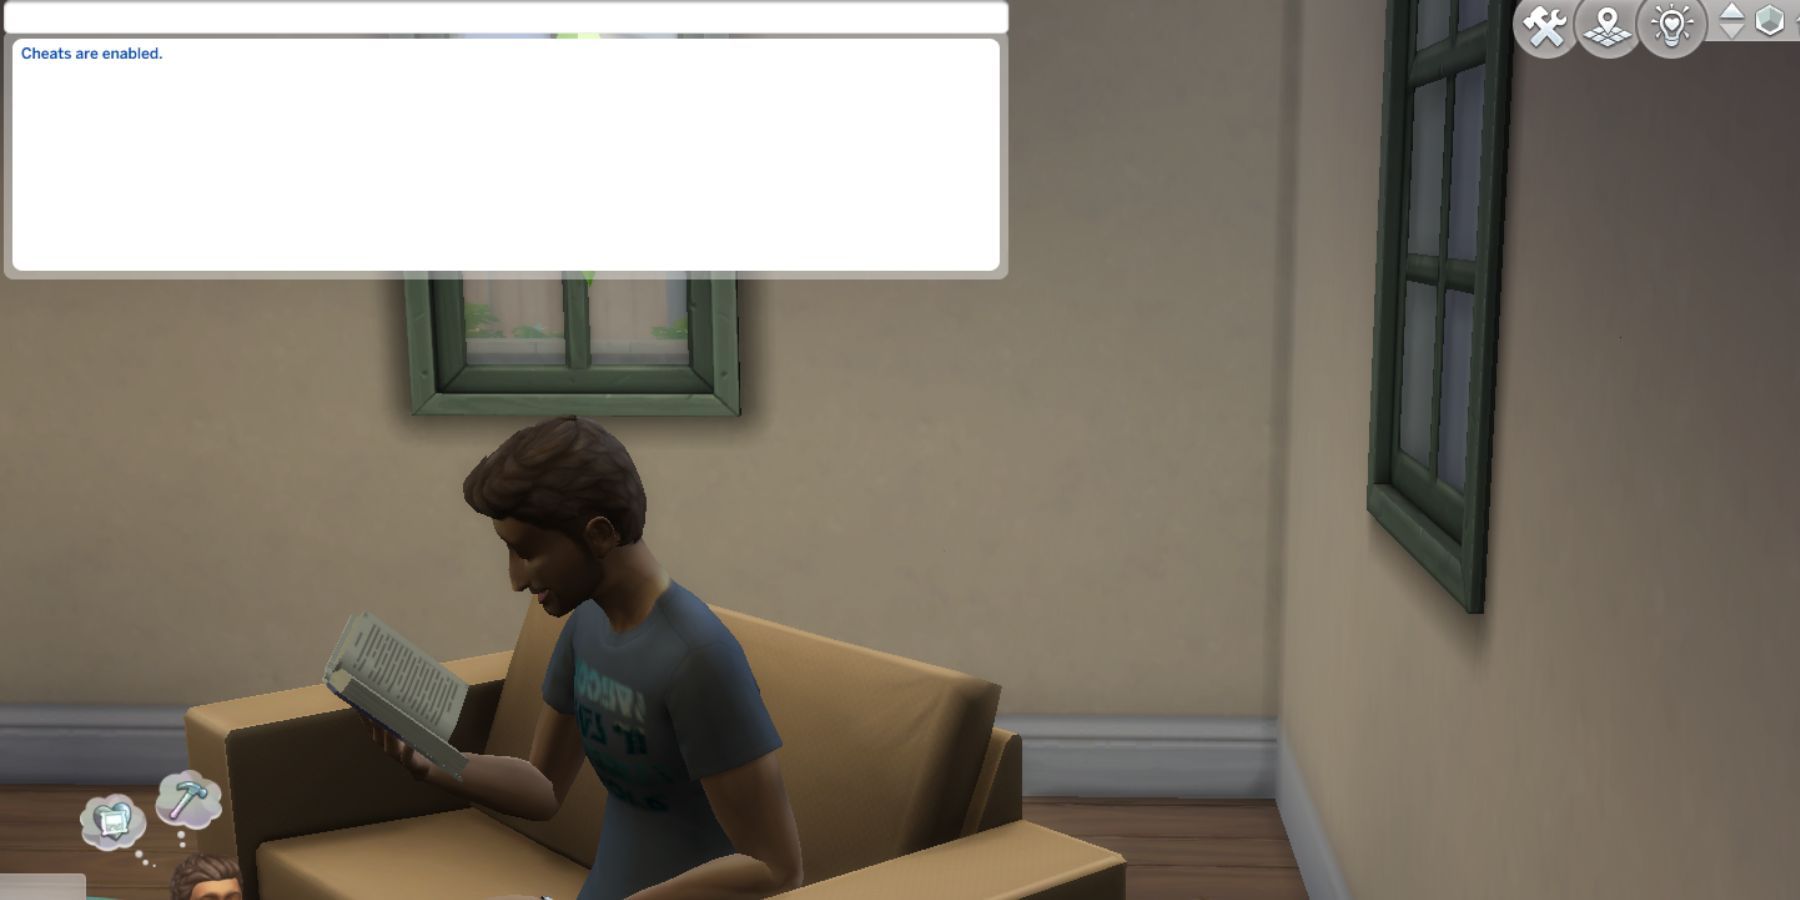 The Sims 4: How to Enable Cheats on PS4